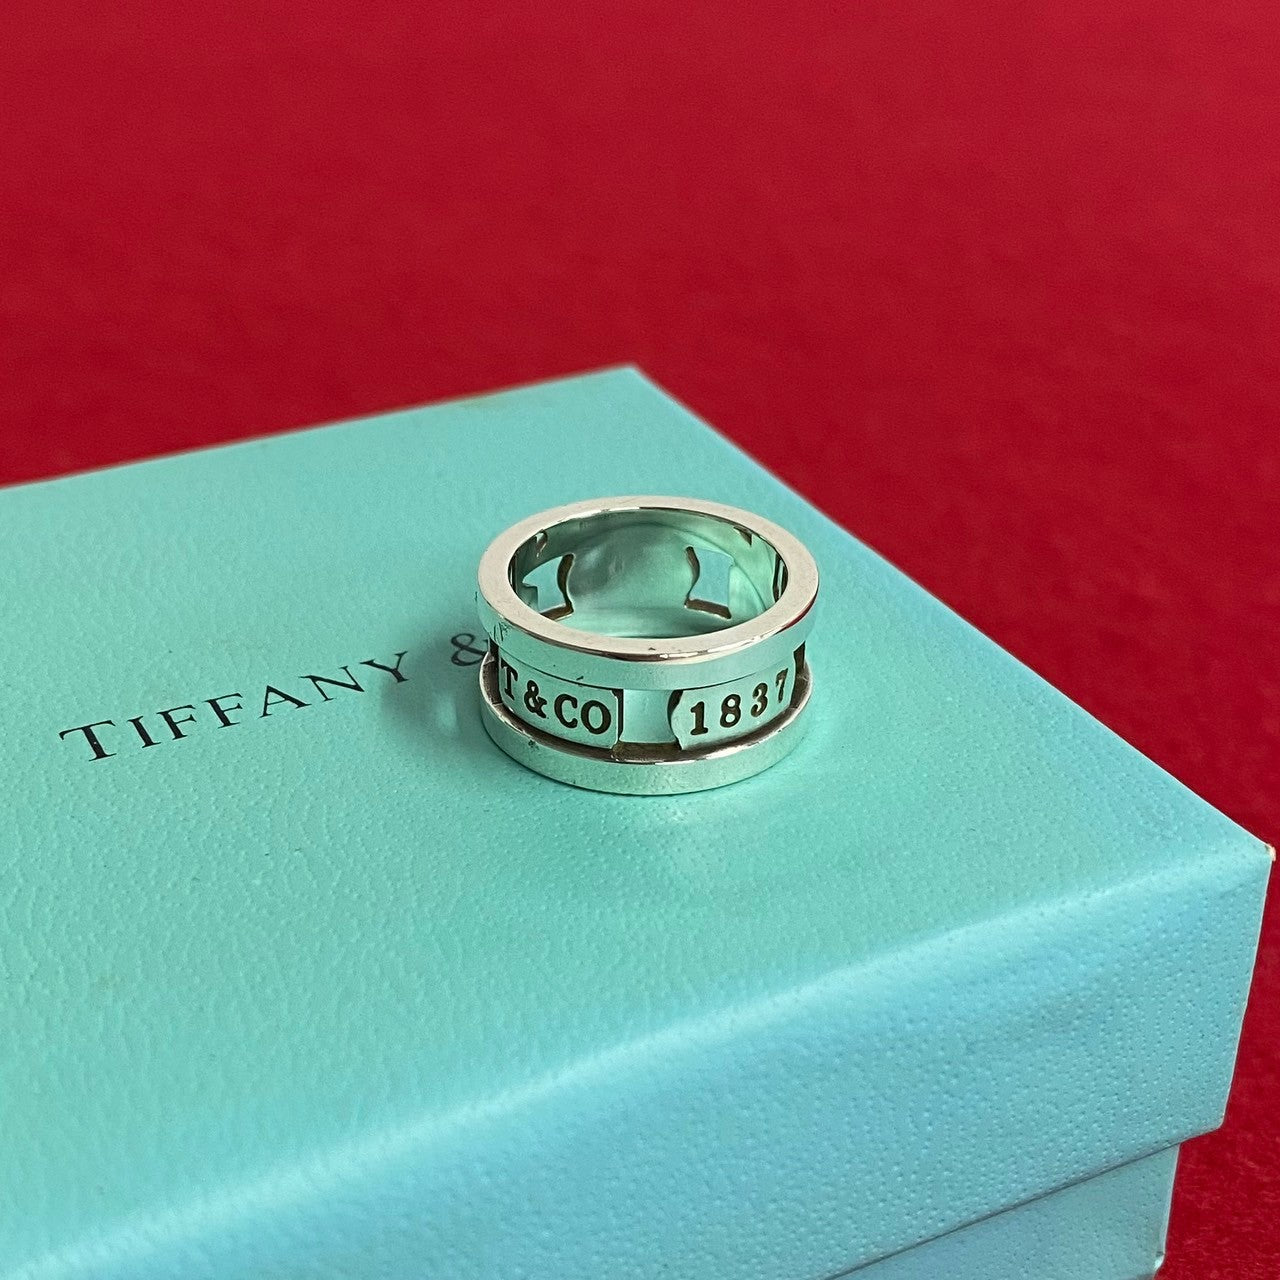 Tiffany & Co 1837 Elements Ring Metal Ring in Good condition